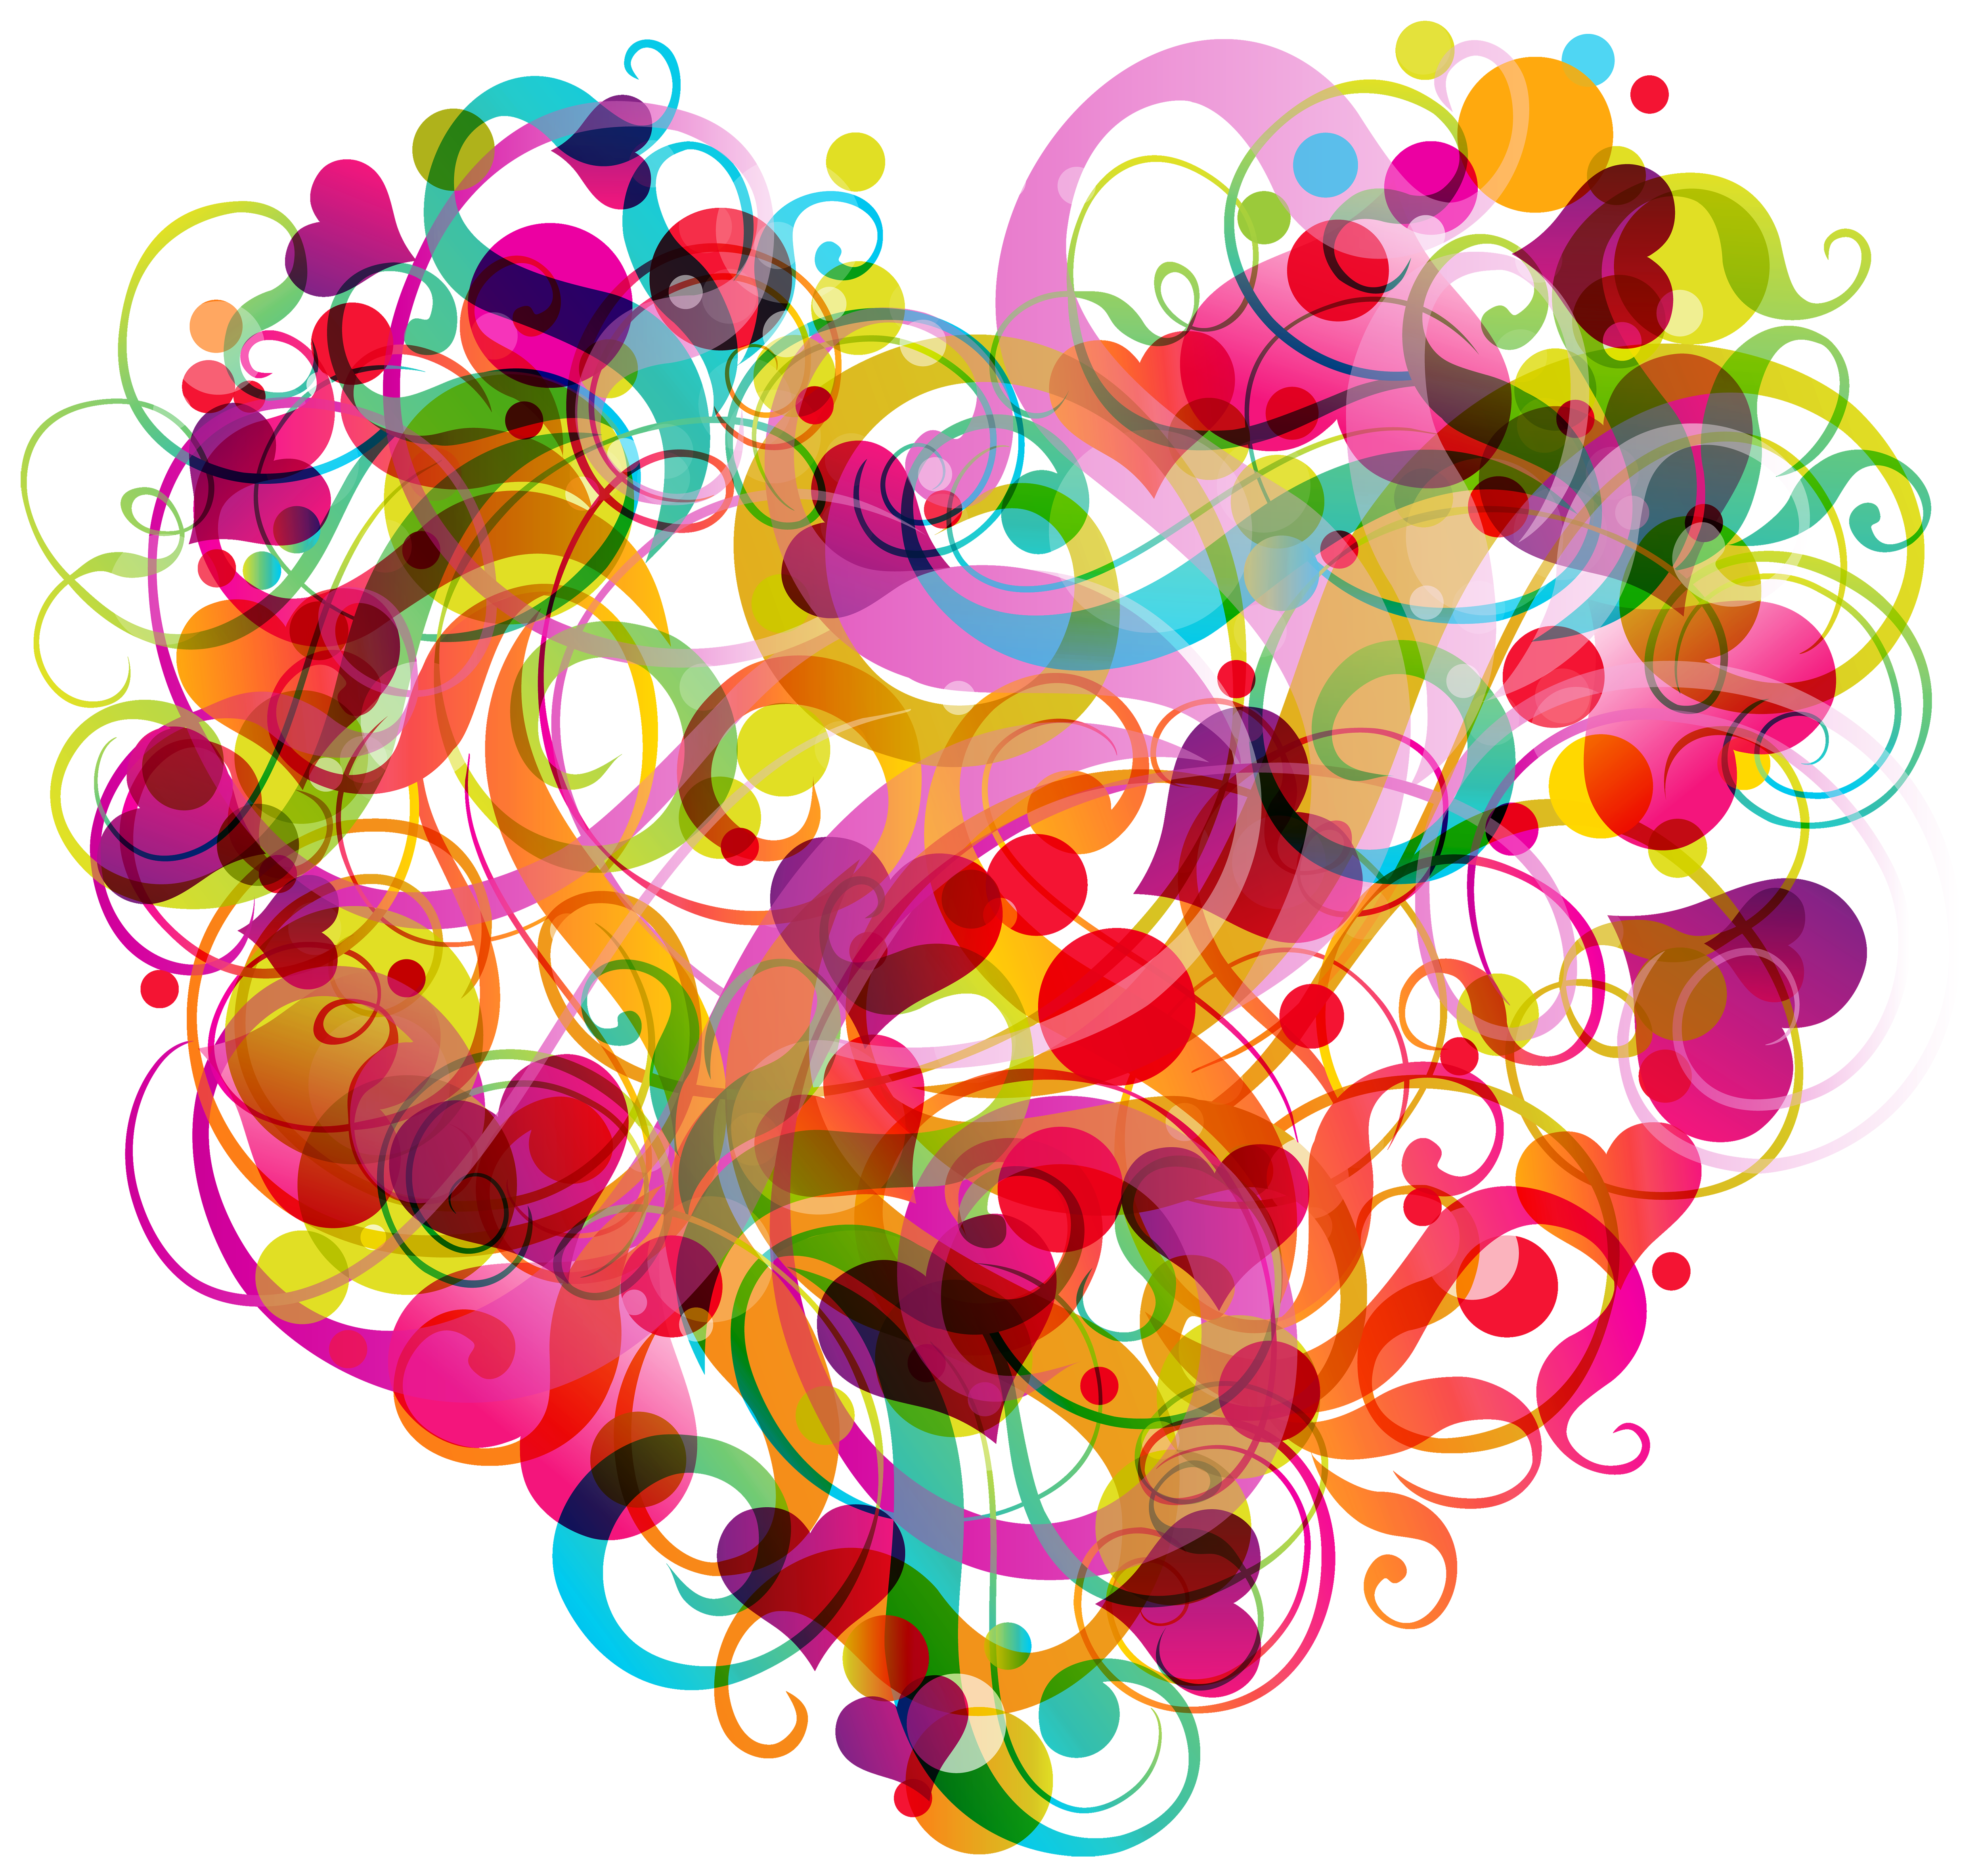 Abstract Colorful Heart PNG Clipart - Best WEB Clipart